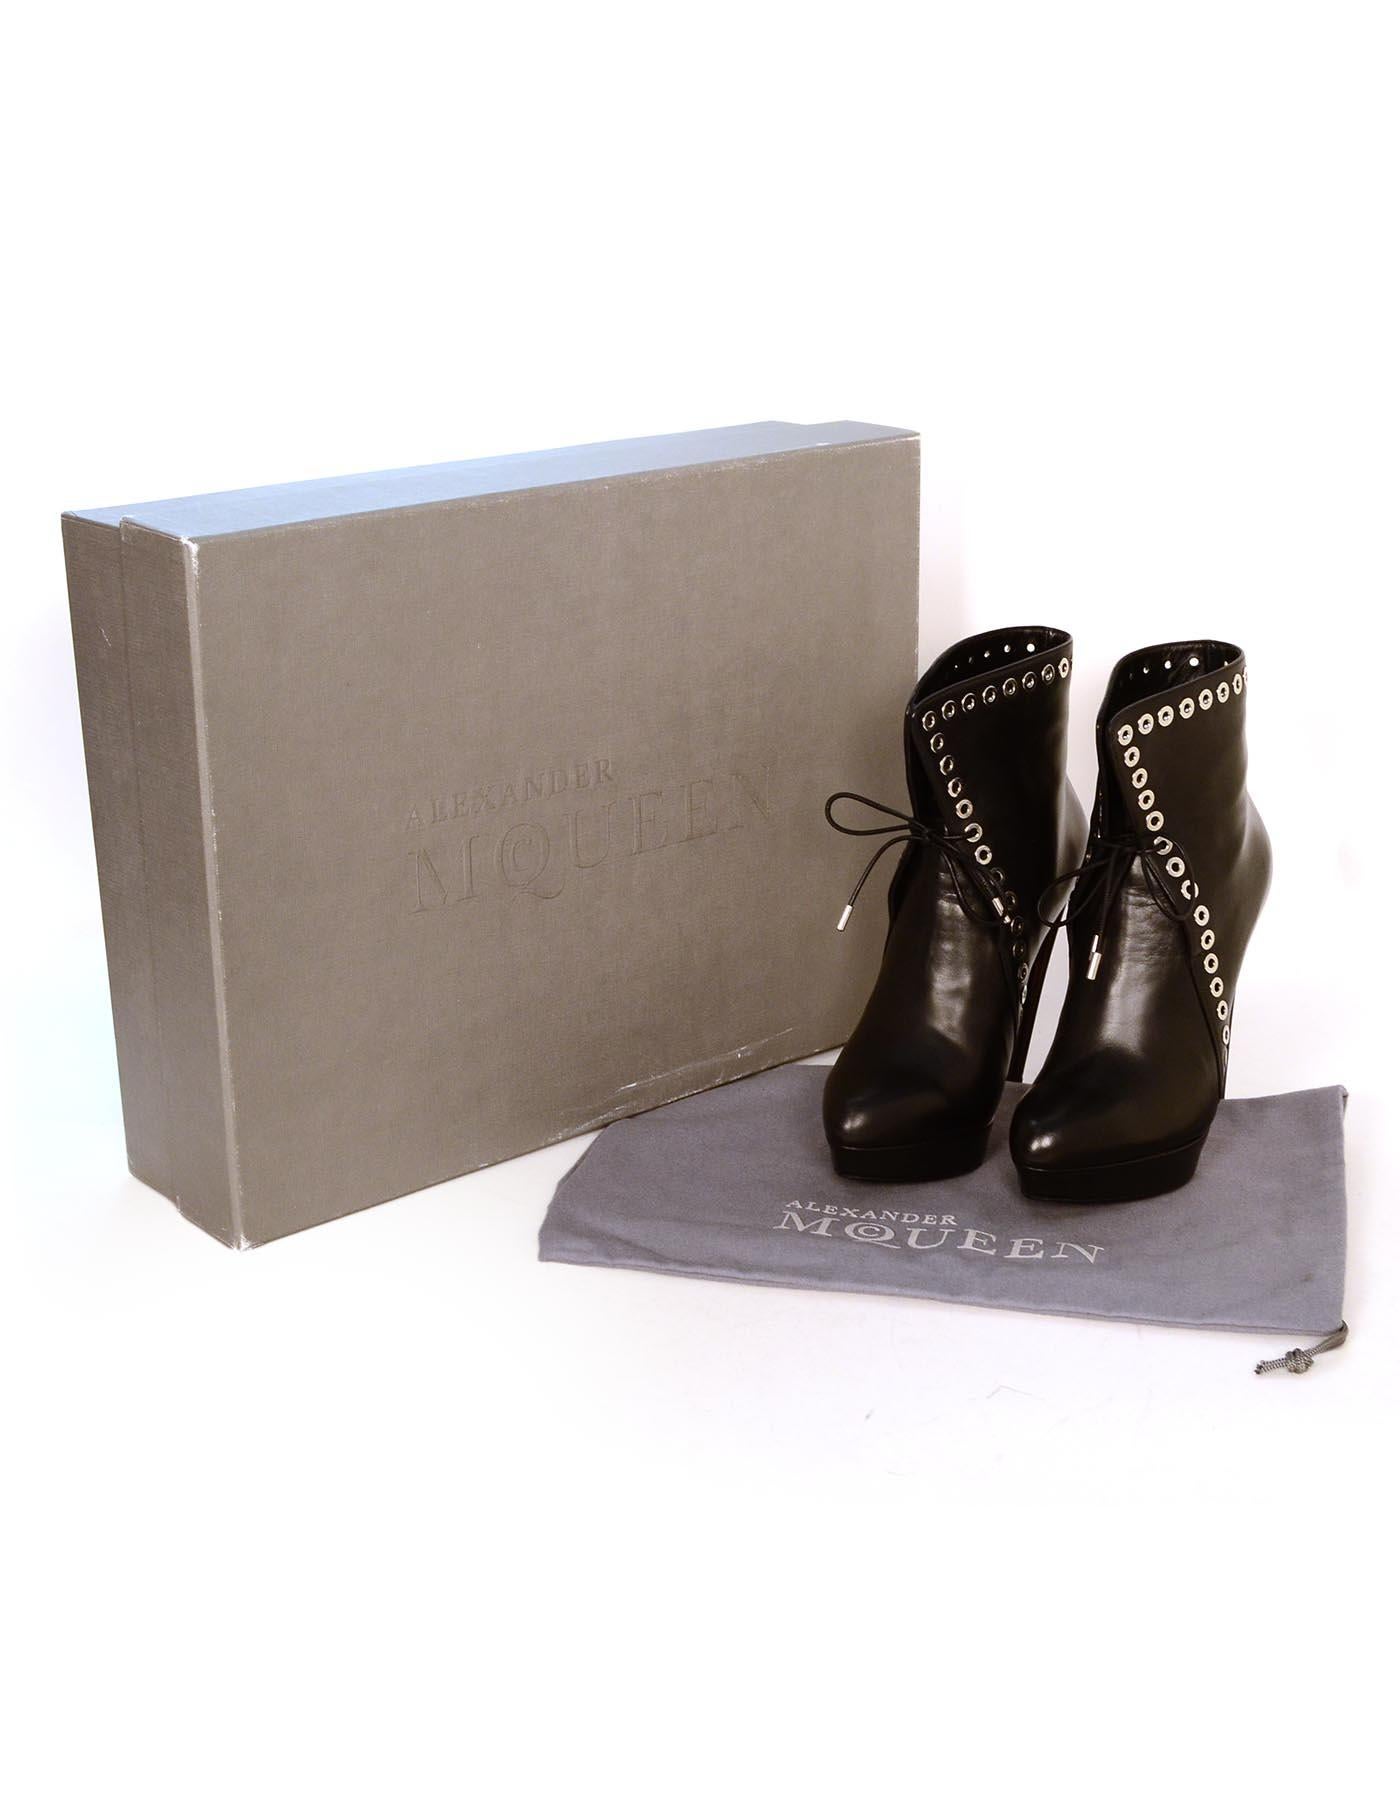 Alexander McQueen Black Leather Silvertone Grommet Heeled Platform Boots Sz 37

Made In: Italy
Color: Black, silver
Hardware: Silvertone
Materials: Leather, metal
Closure/Opening:  Lace up front
Overall Condition: Excellent pre-owned condition with